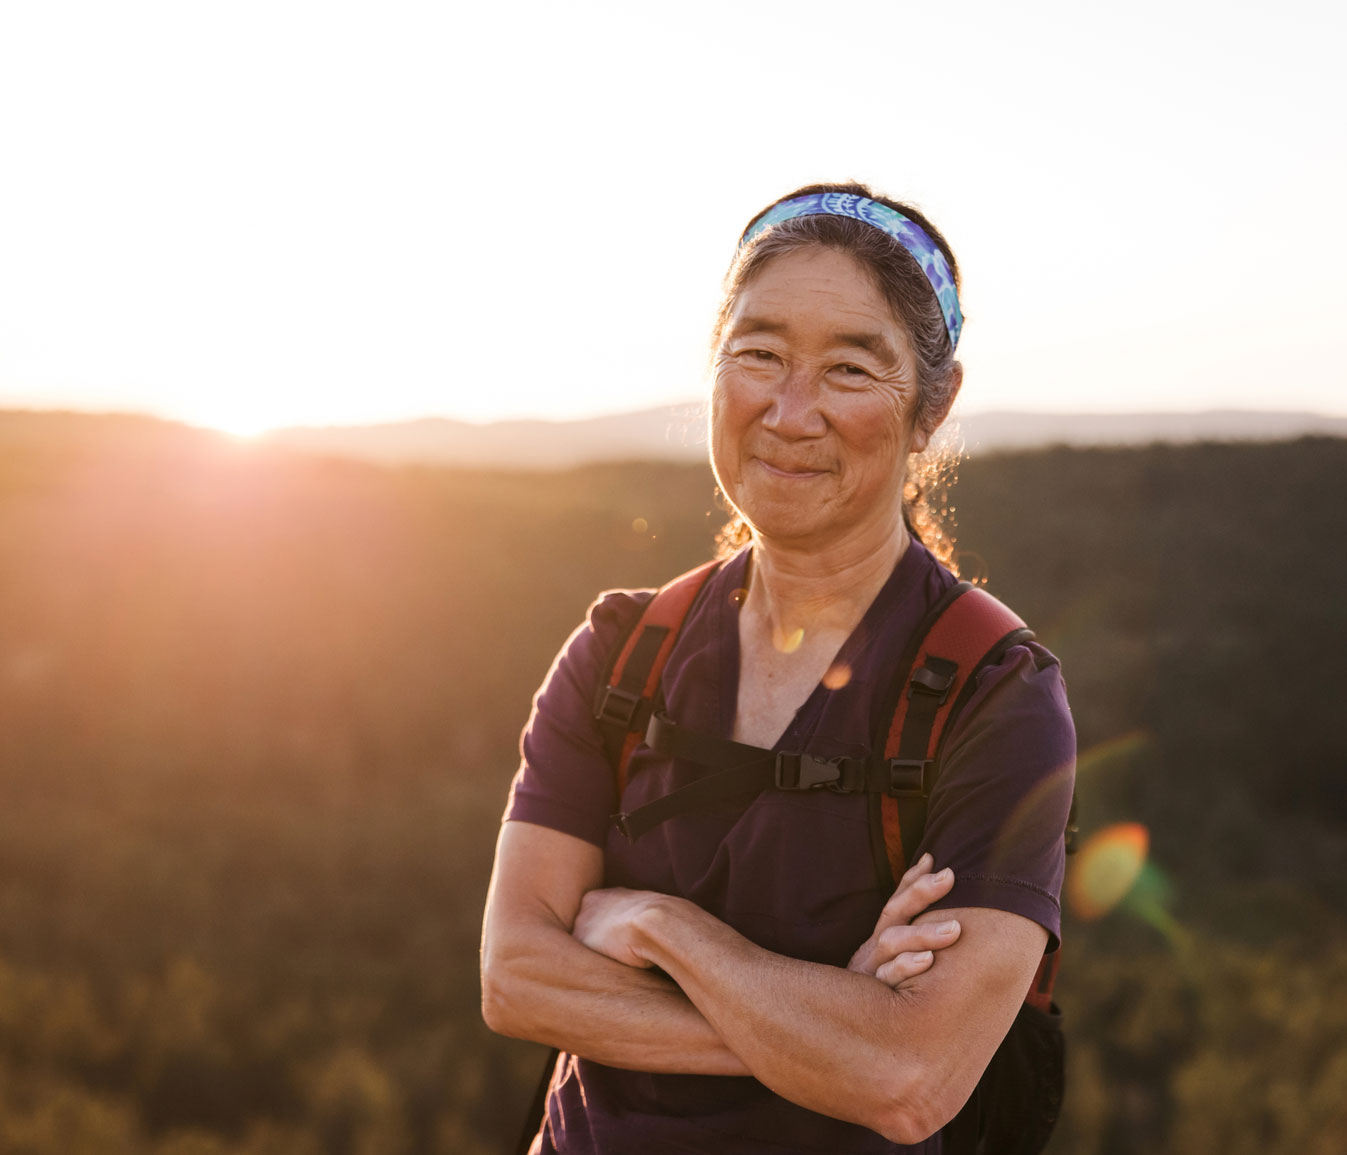 Mature woman wearing backpack stands outside with sun setting in distance